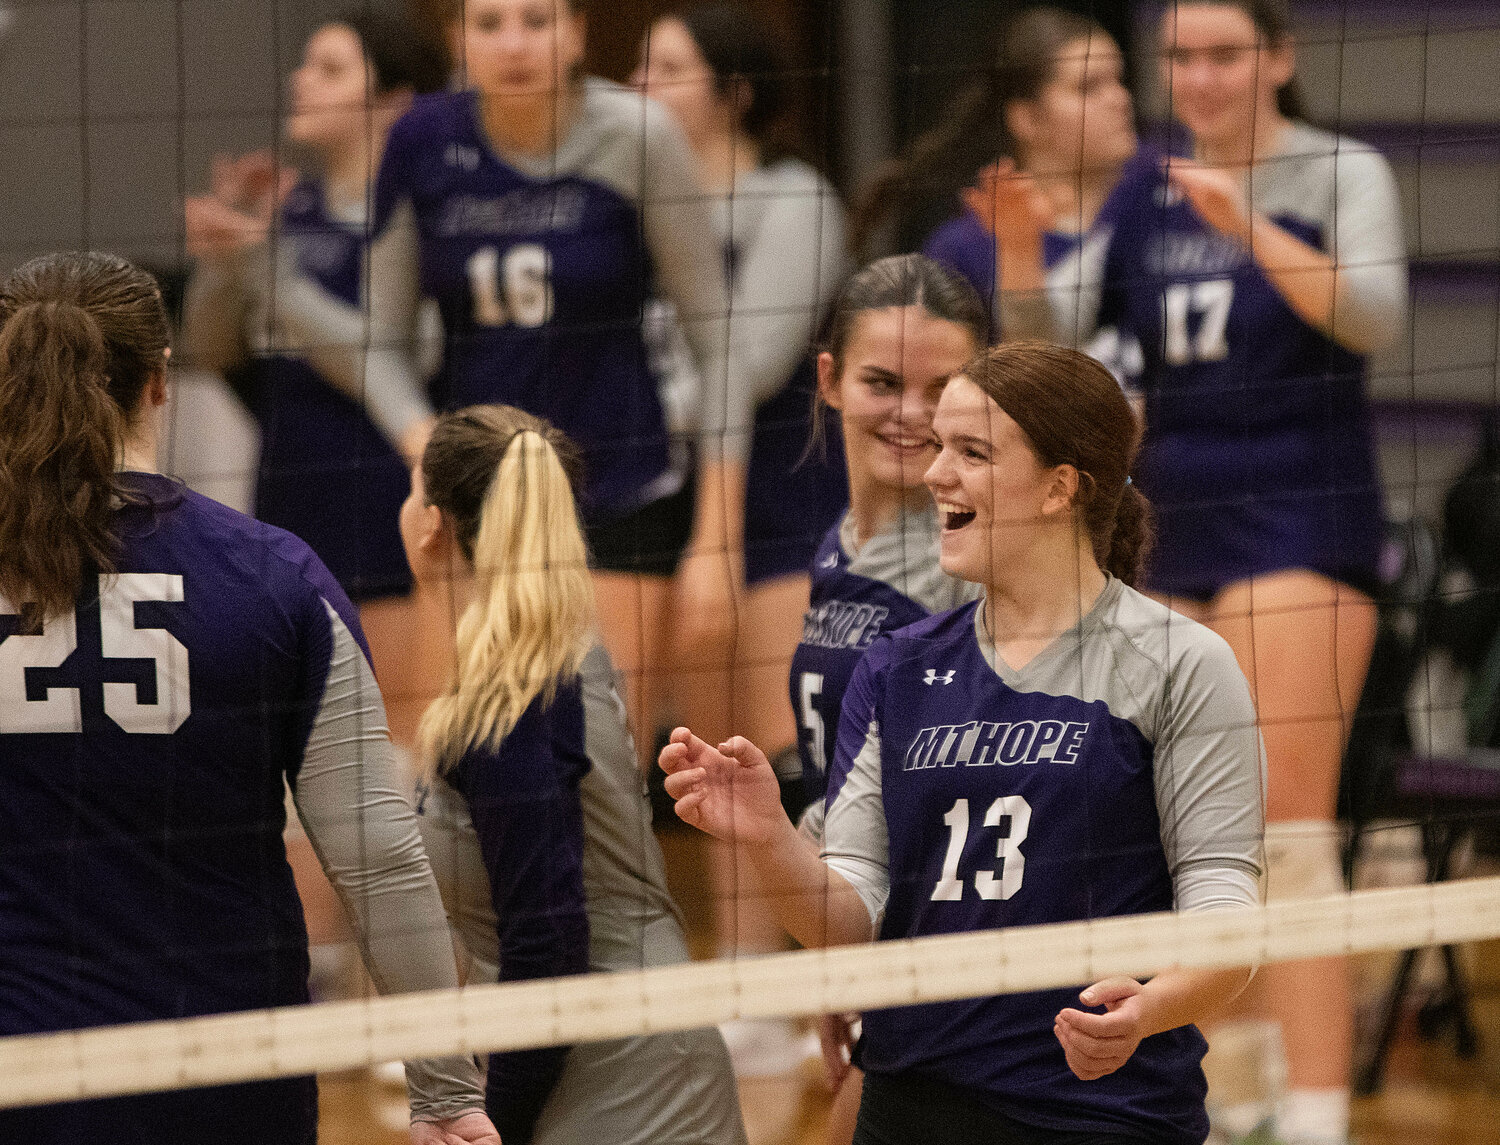 Mia Shaw (right) celebrates with the team after a kill.